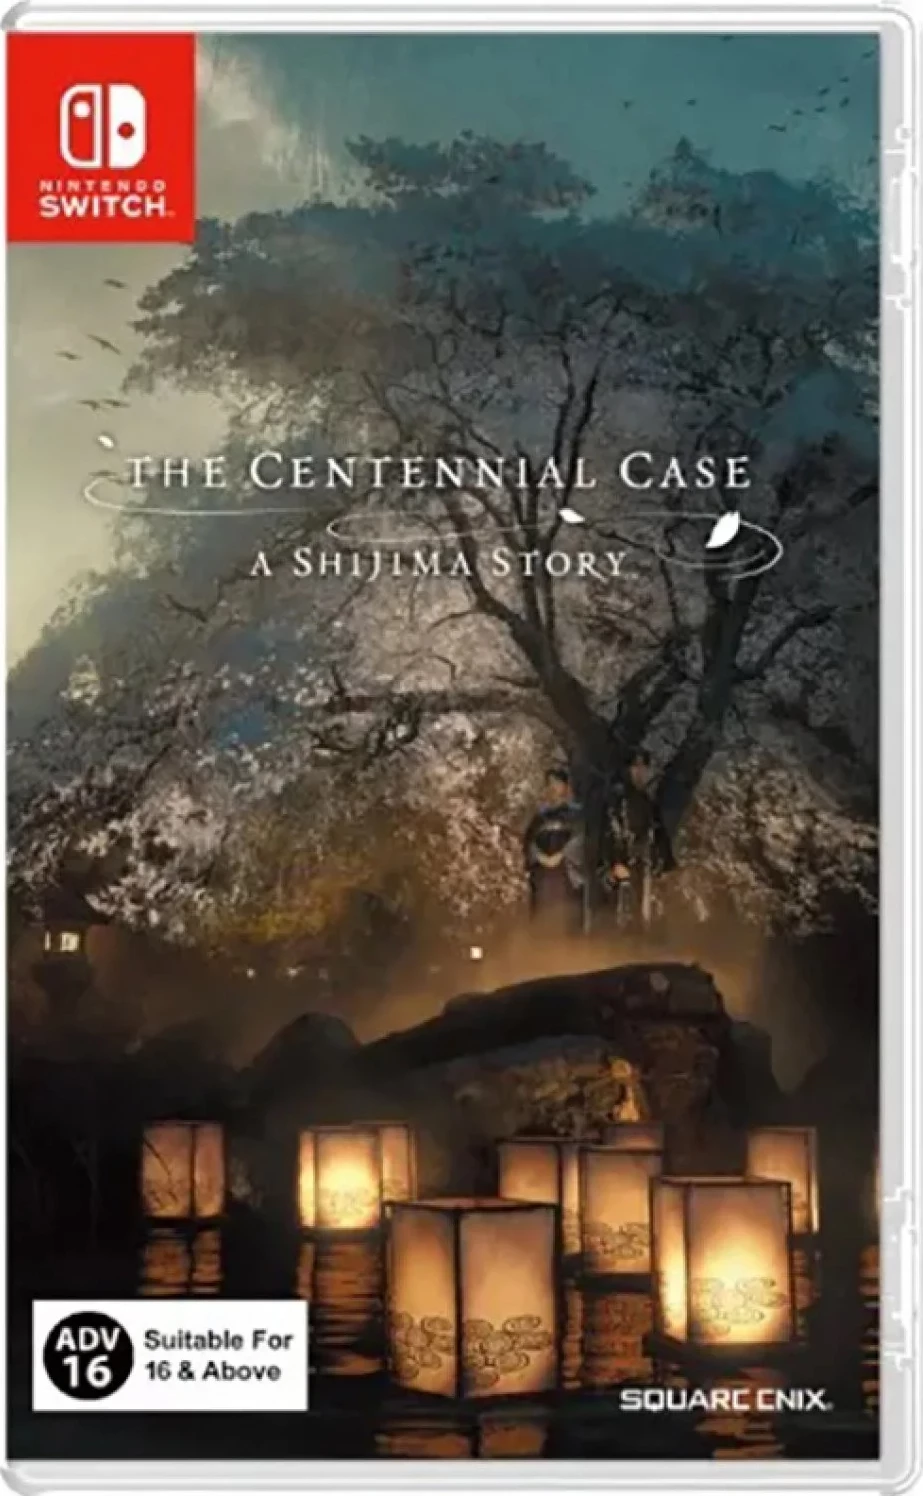 The Centennial Case: A Shijima Story (Asia Import) (Switch), Square Enix